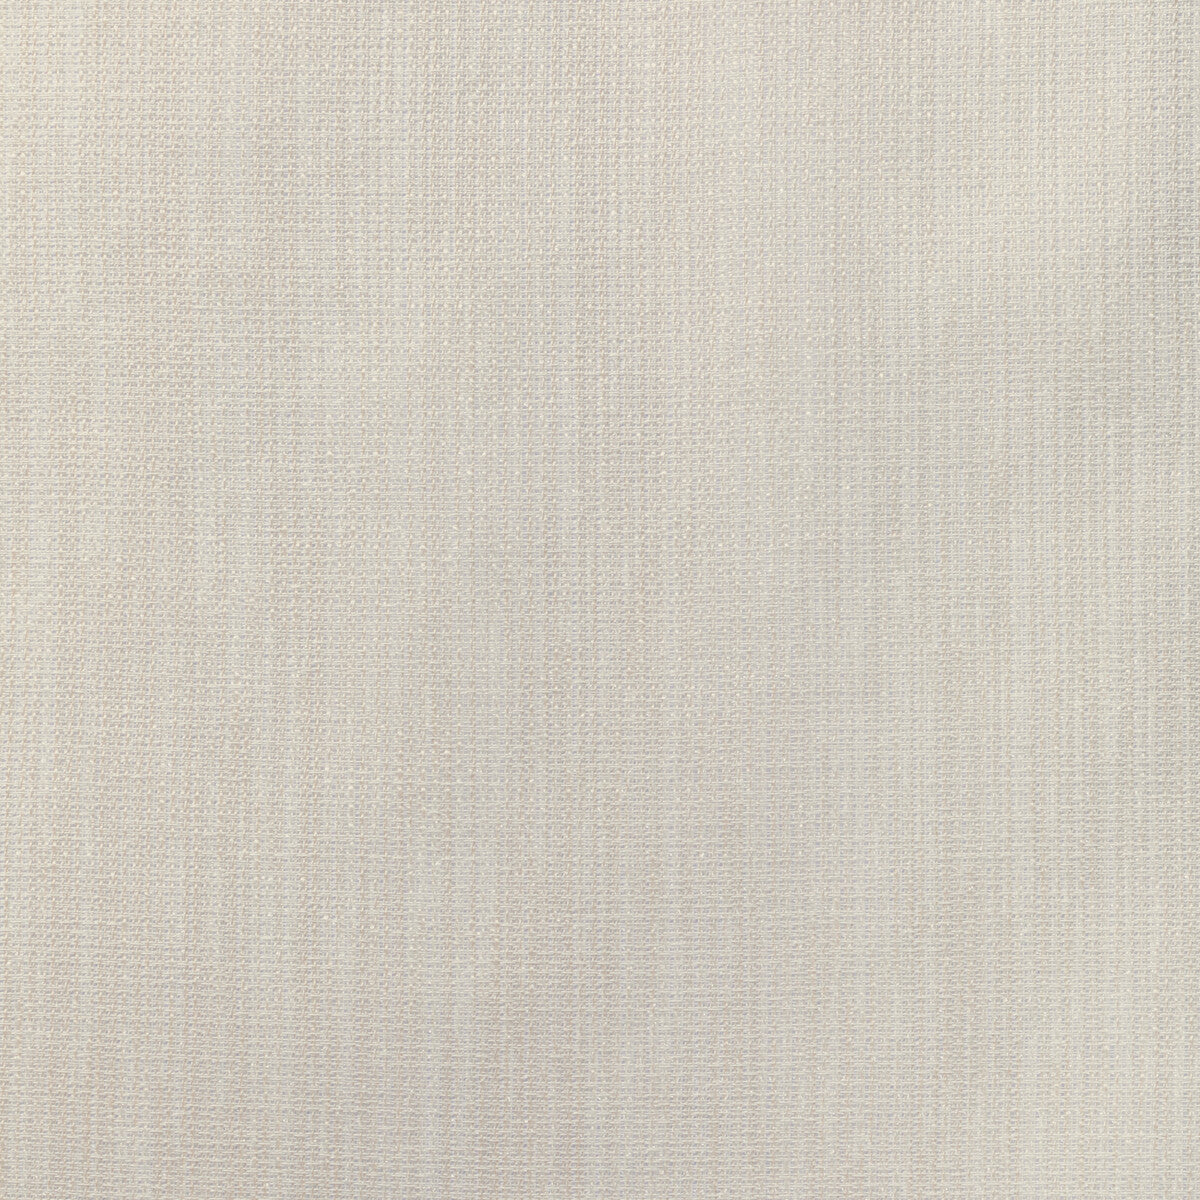 Kravet Contract fabric in 4521-116 color - pattern 4521.116.0 - by Kravet Contract in the Sheer Outlook collection